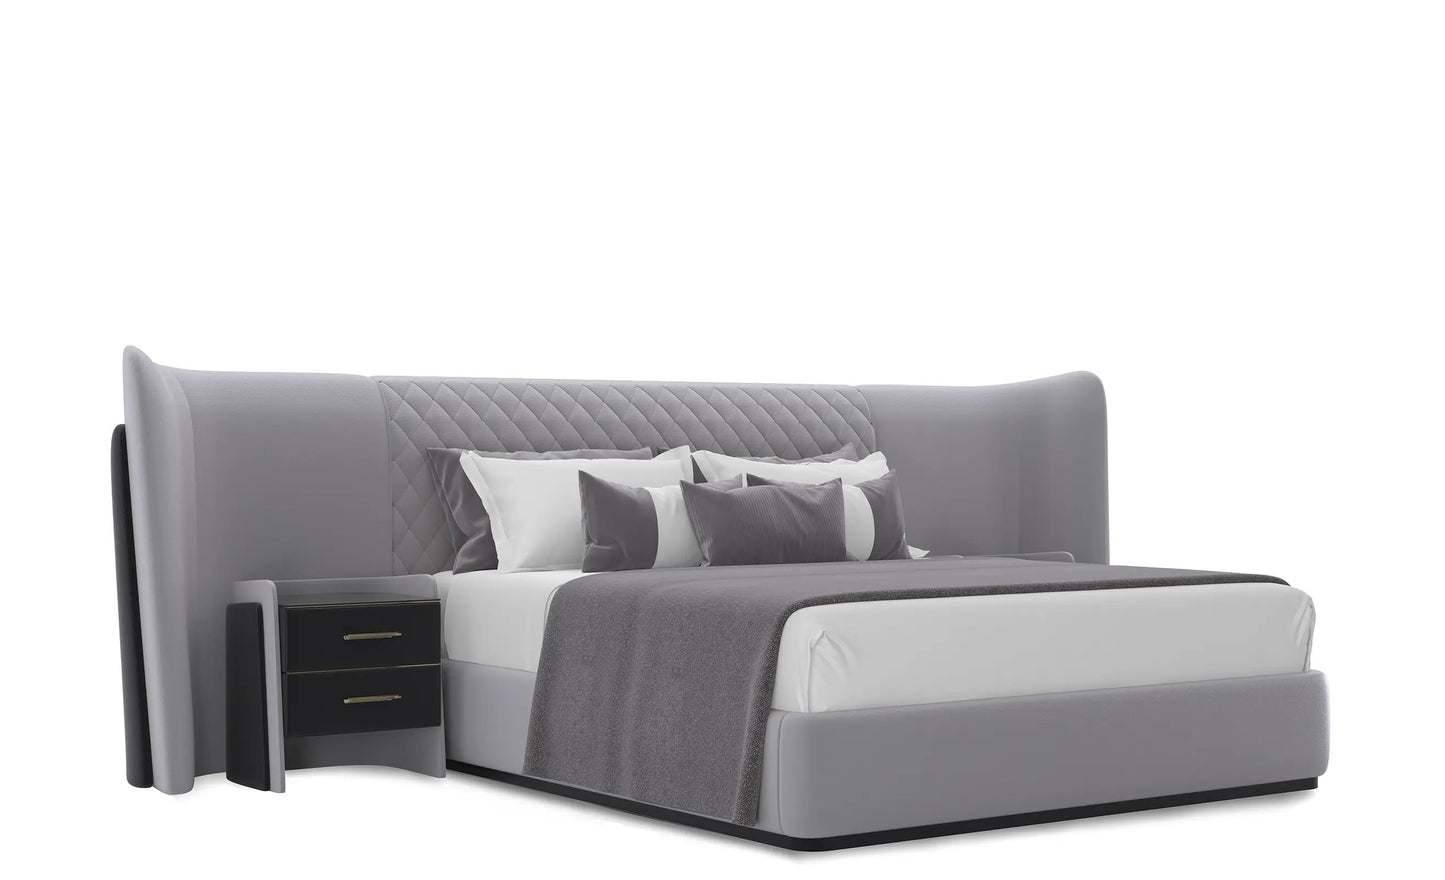 CHARLA XL BED